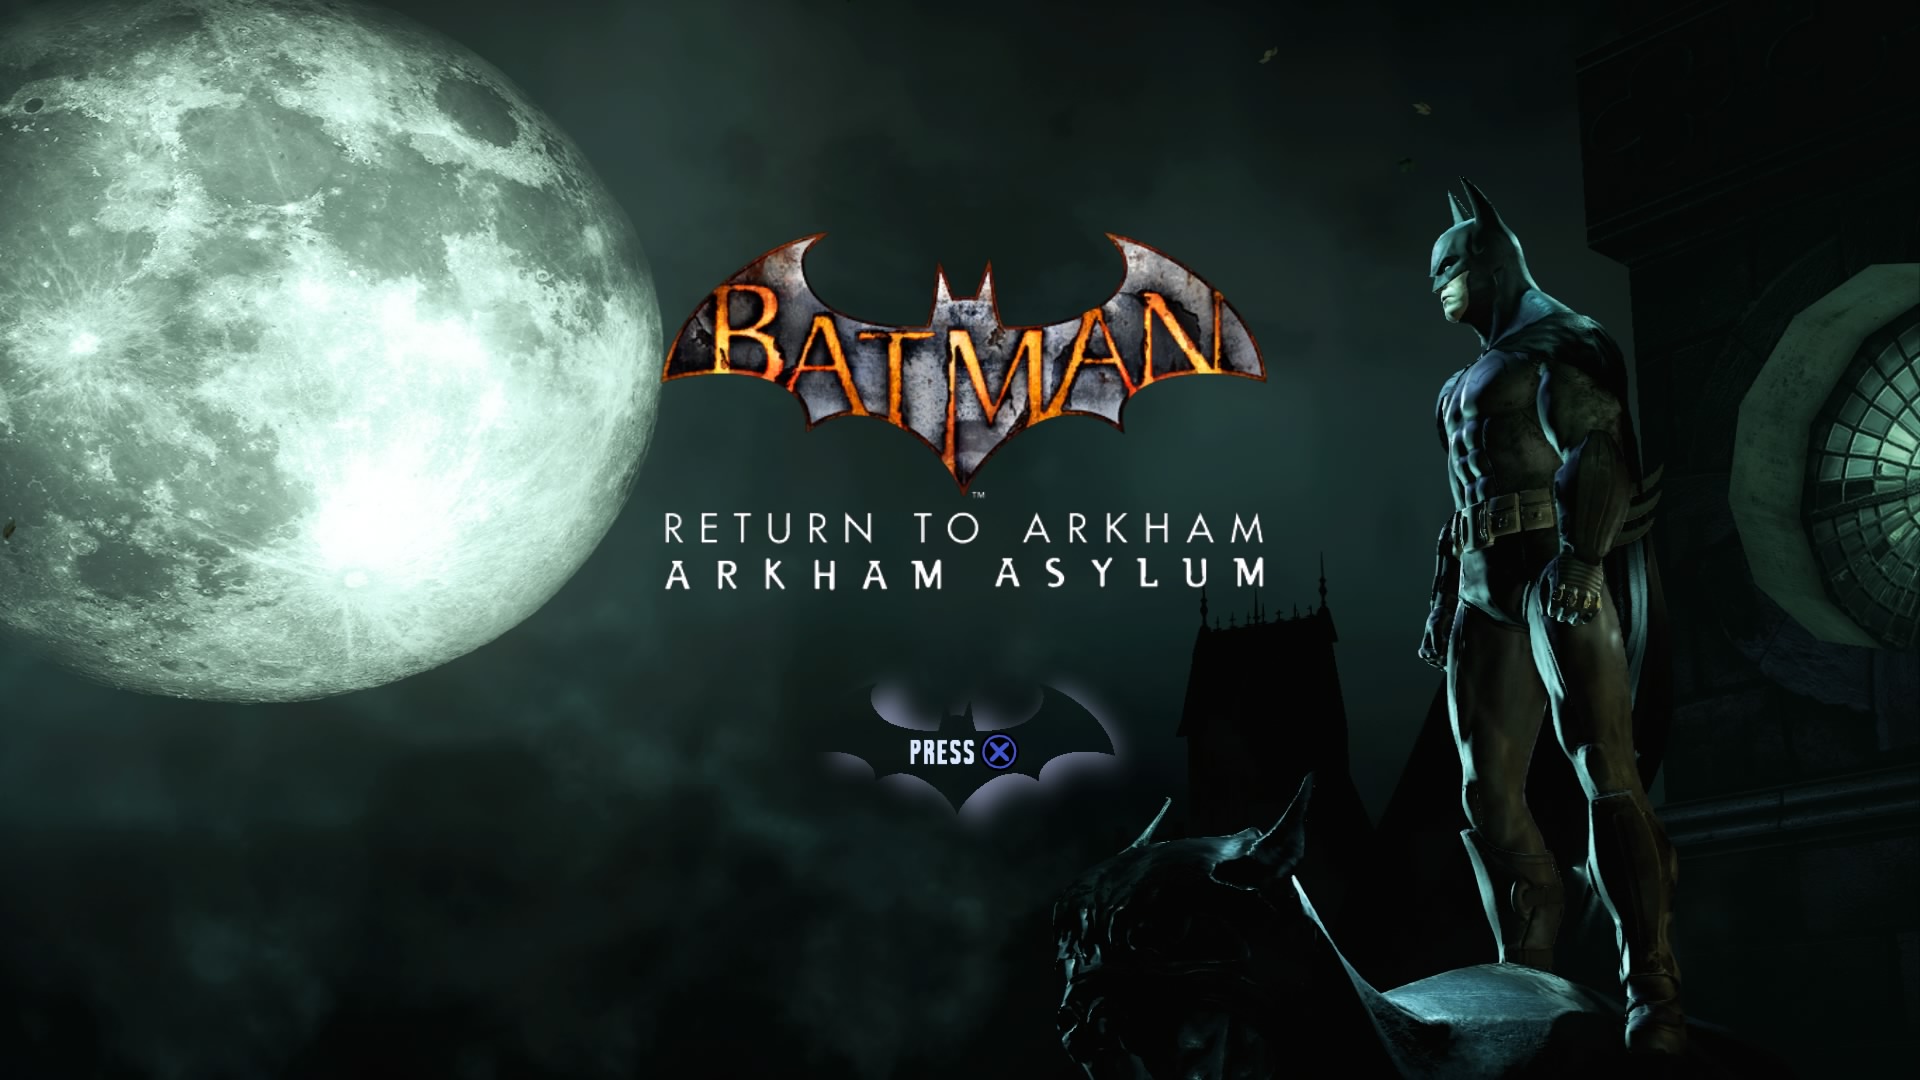 aardbeving chirurg lunch Batman: Return to Arkham – Review (PS4) – We The Nerdy